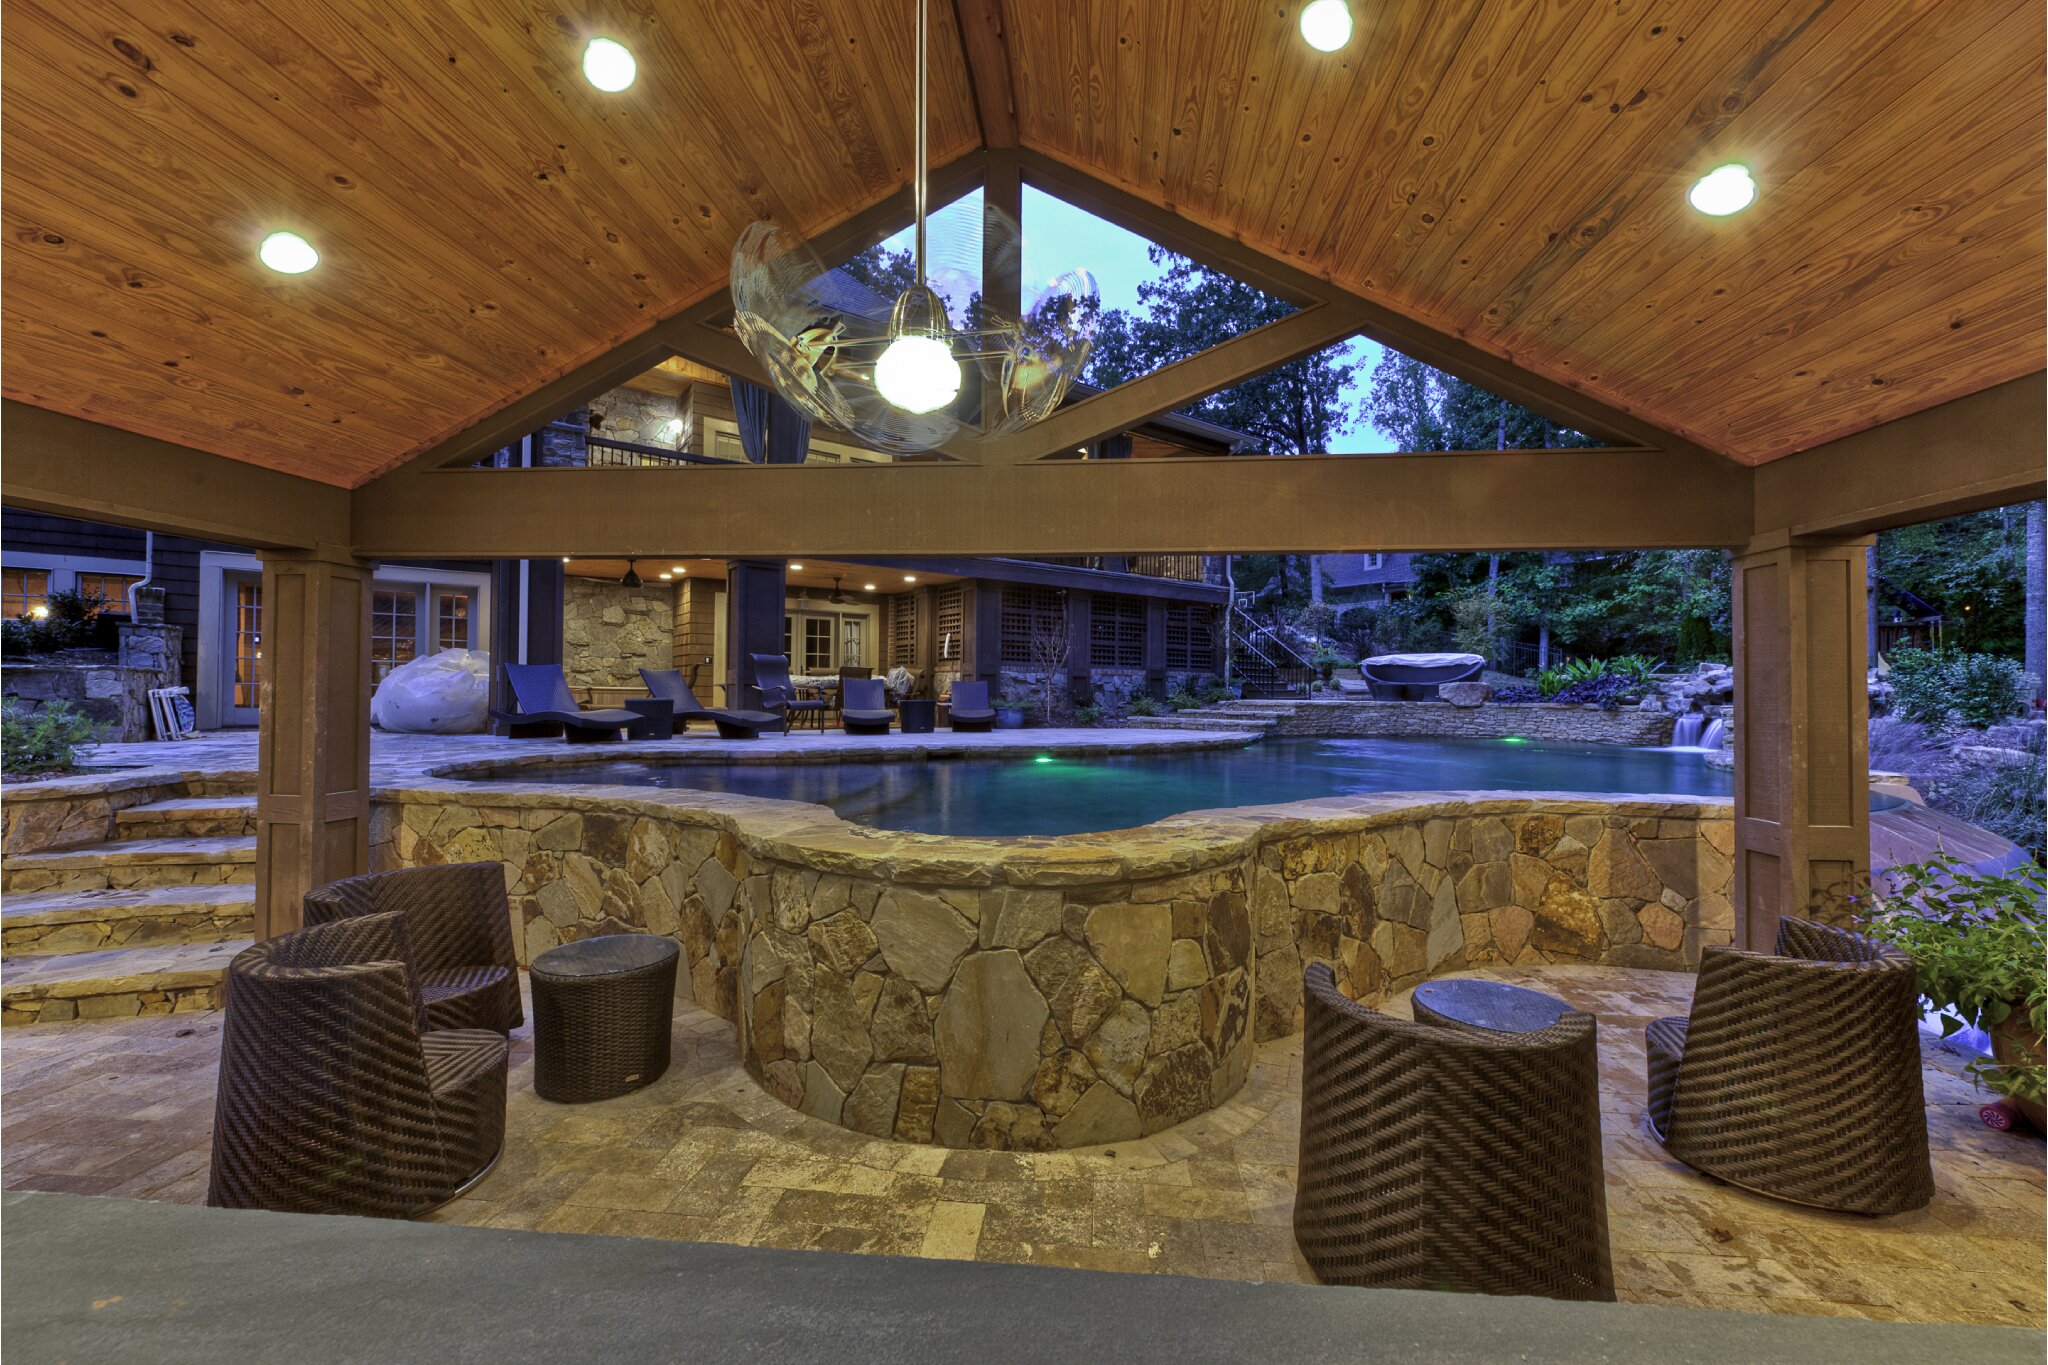 Covered porch home addition with recessed lighting and stone-surrounded inground pool.